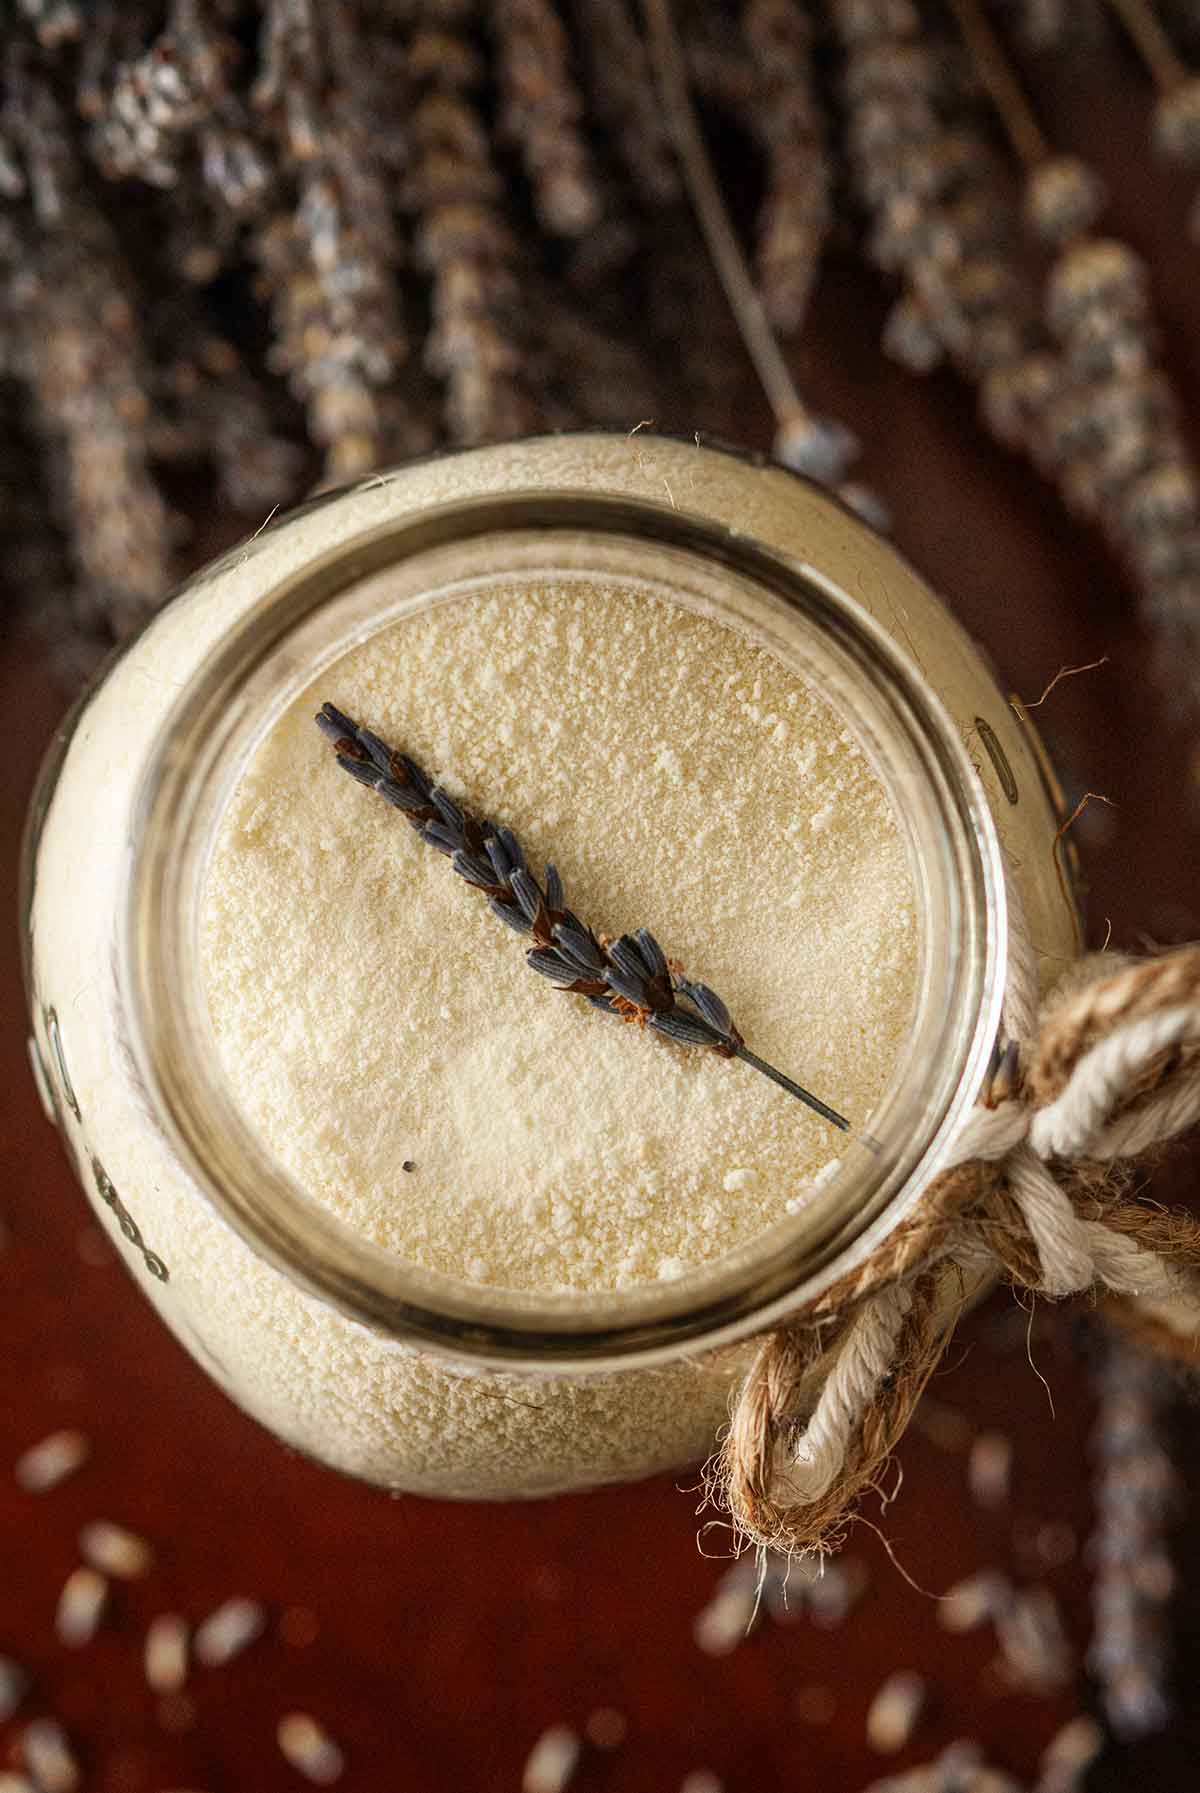 A sprig of lavender in a jar of powdered milk on a table.